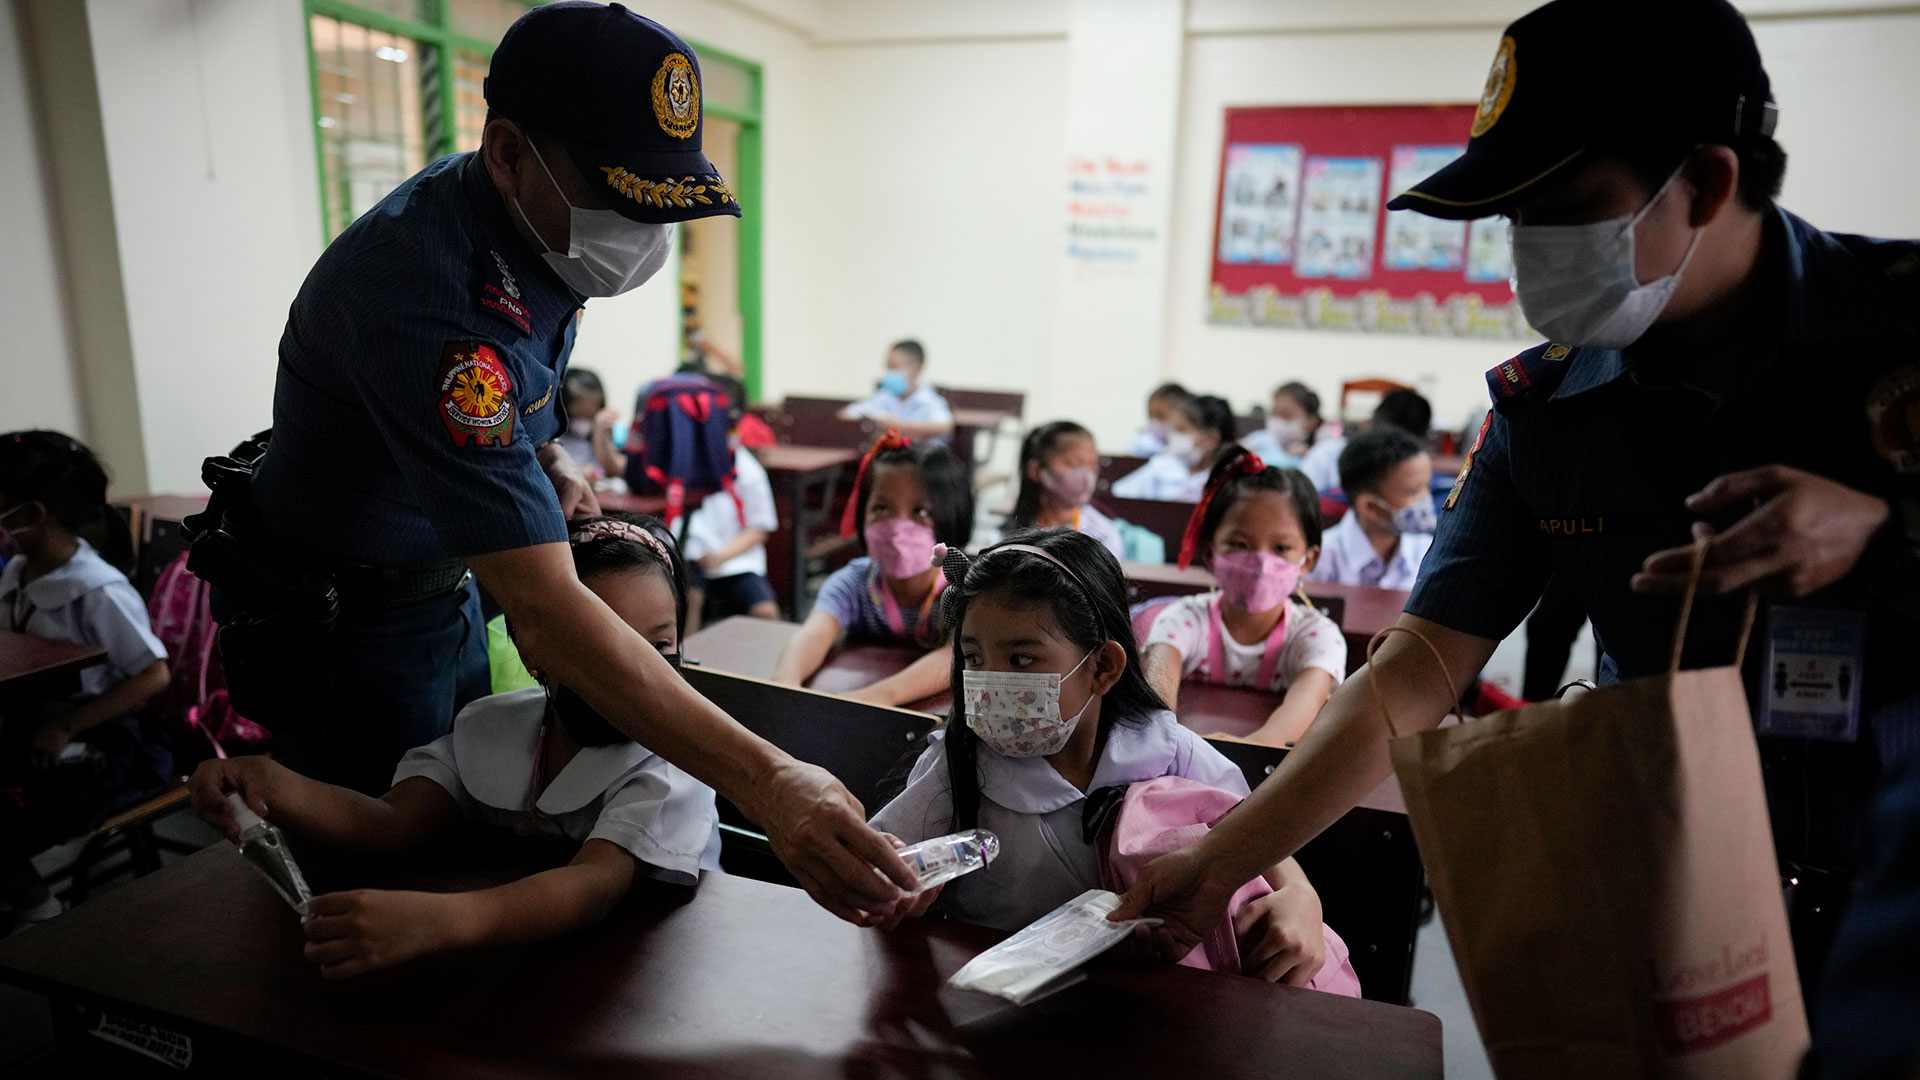 Police distribute alcohol and face masks to students during the opening of classes at San Juan Elementary School in metro Manila, Philippines, Monday, Aug. 22, 2022. (AP Photo/Aaron Favila)